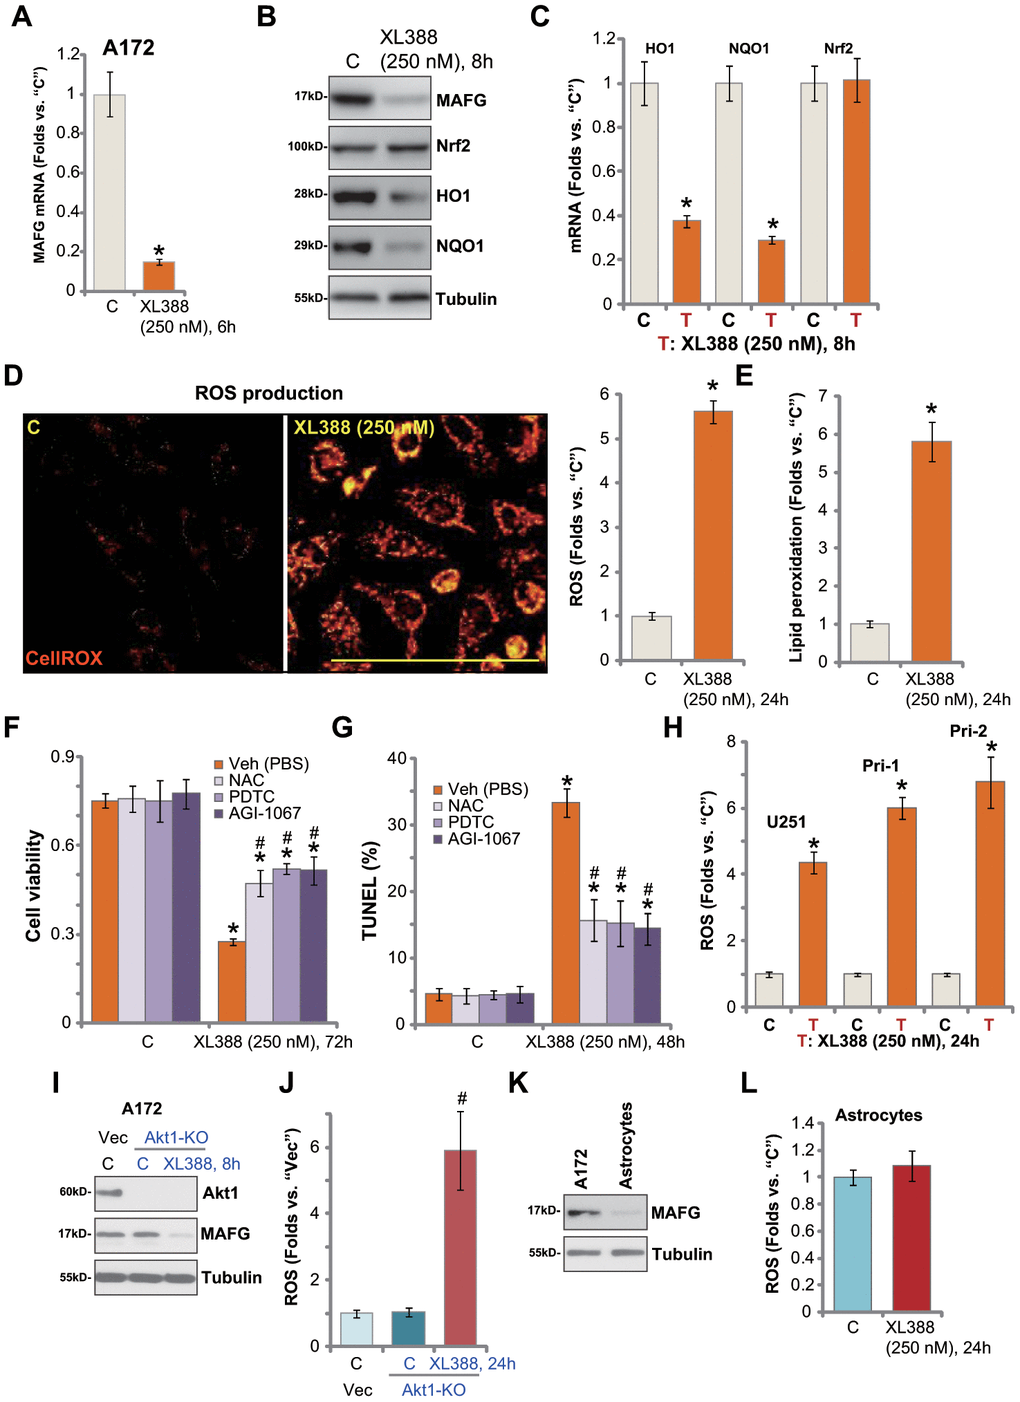 XL388 induces oxidative injury in human glioma cells. A172 cells or primary human glioma cells (“Pri-1”) were treated with XL388 (250 nM) and cultured for indicated time periods, then expression of listed mRNAs and proteins was tested by qPCR and Western blotting assays (A–C); Relative CellROX intensity (D) and lipid peroxidation (E) levels were tested. A172 cells were pretreated for 1h with n-acetylcysteine (NAC, 400 μM), pyrrolidine dithiocarbamate (PDTC, 10 μM) or AGI-1067 (10 μM), followed by XL388 (250 nM) stimulation for another 48-72h, then cell viability and apoptosis were tested by CCK-8 (F) and nuclear TUNEL staining (G) assays, respectively. U251MG (“U251”) and primary human glioma cells (“Pri-1/Pri-2”) were treated with XL388 (250 nM) for 12h, then the relative CellROX intensity was tested (H). A172 cells with the CRISPR/Cas9-Akt1-KO construct (“Akt1-KO” cells) or empty vector (“Vec”) were treated with or without XL388 (250 nM) and expression of listed proteins was shown (I). Relative ROS contents were tested by measuring CellROX intensity (J). Expression of MAFG protein in A172 cells and primary human astrocytes (“Astrocytes”) was shown (K); Astrocytes were treated with or without XL388 (250 nM) for 24h, and ROS intensity tested by CellROX assay (L). Data were presented as mean ± SD (n=5).* p #p D).